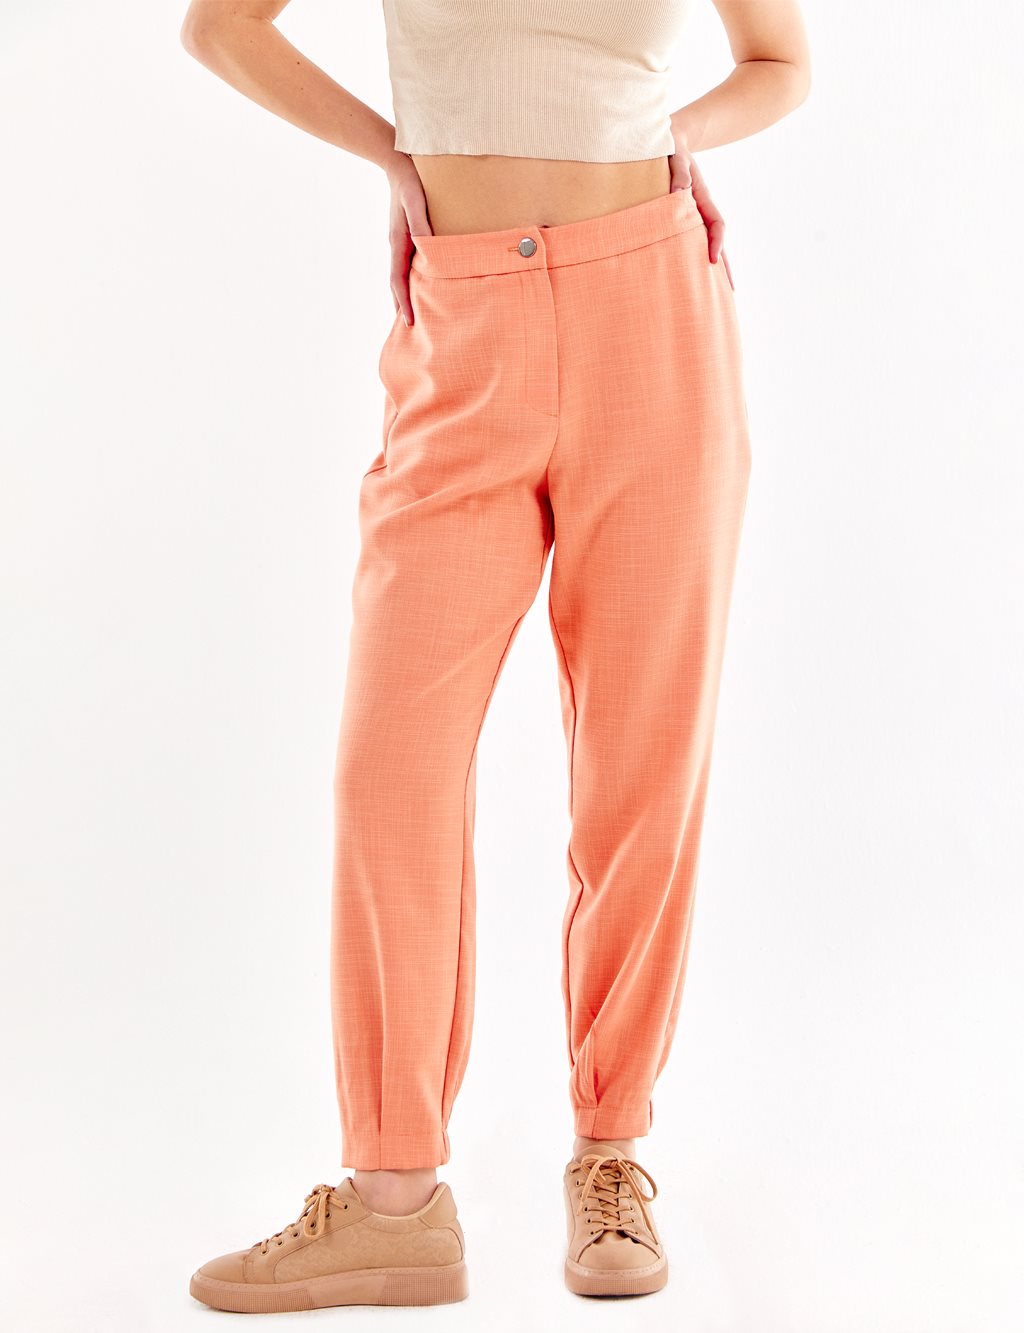 Gray Patterned Jogger Pants Peach